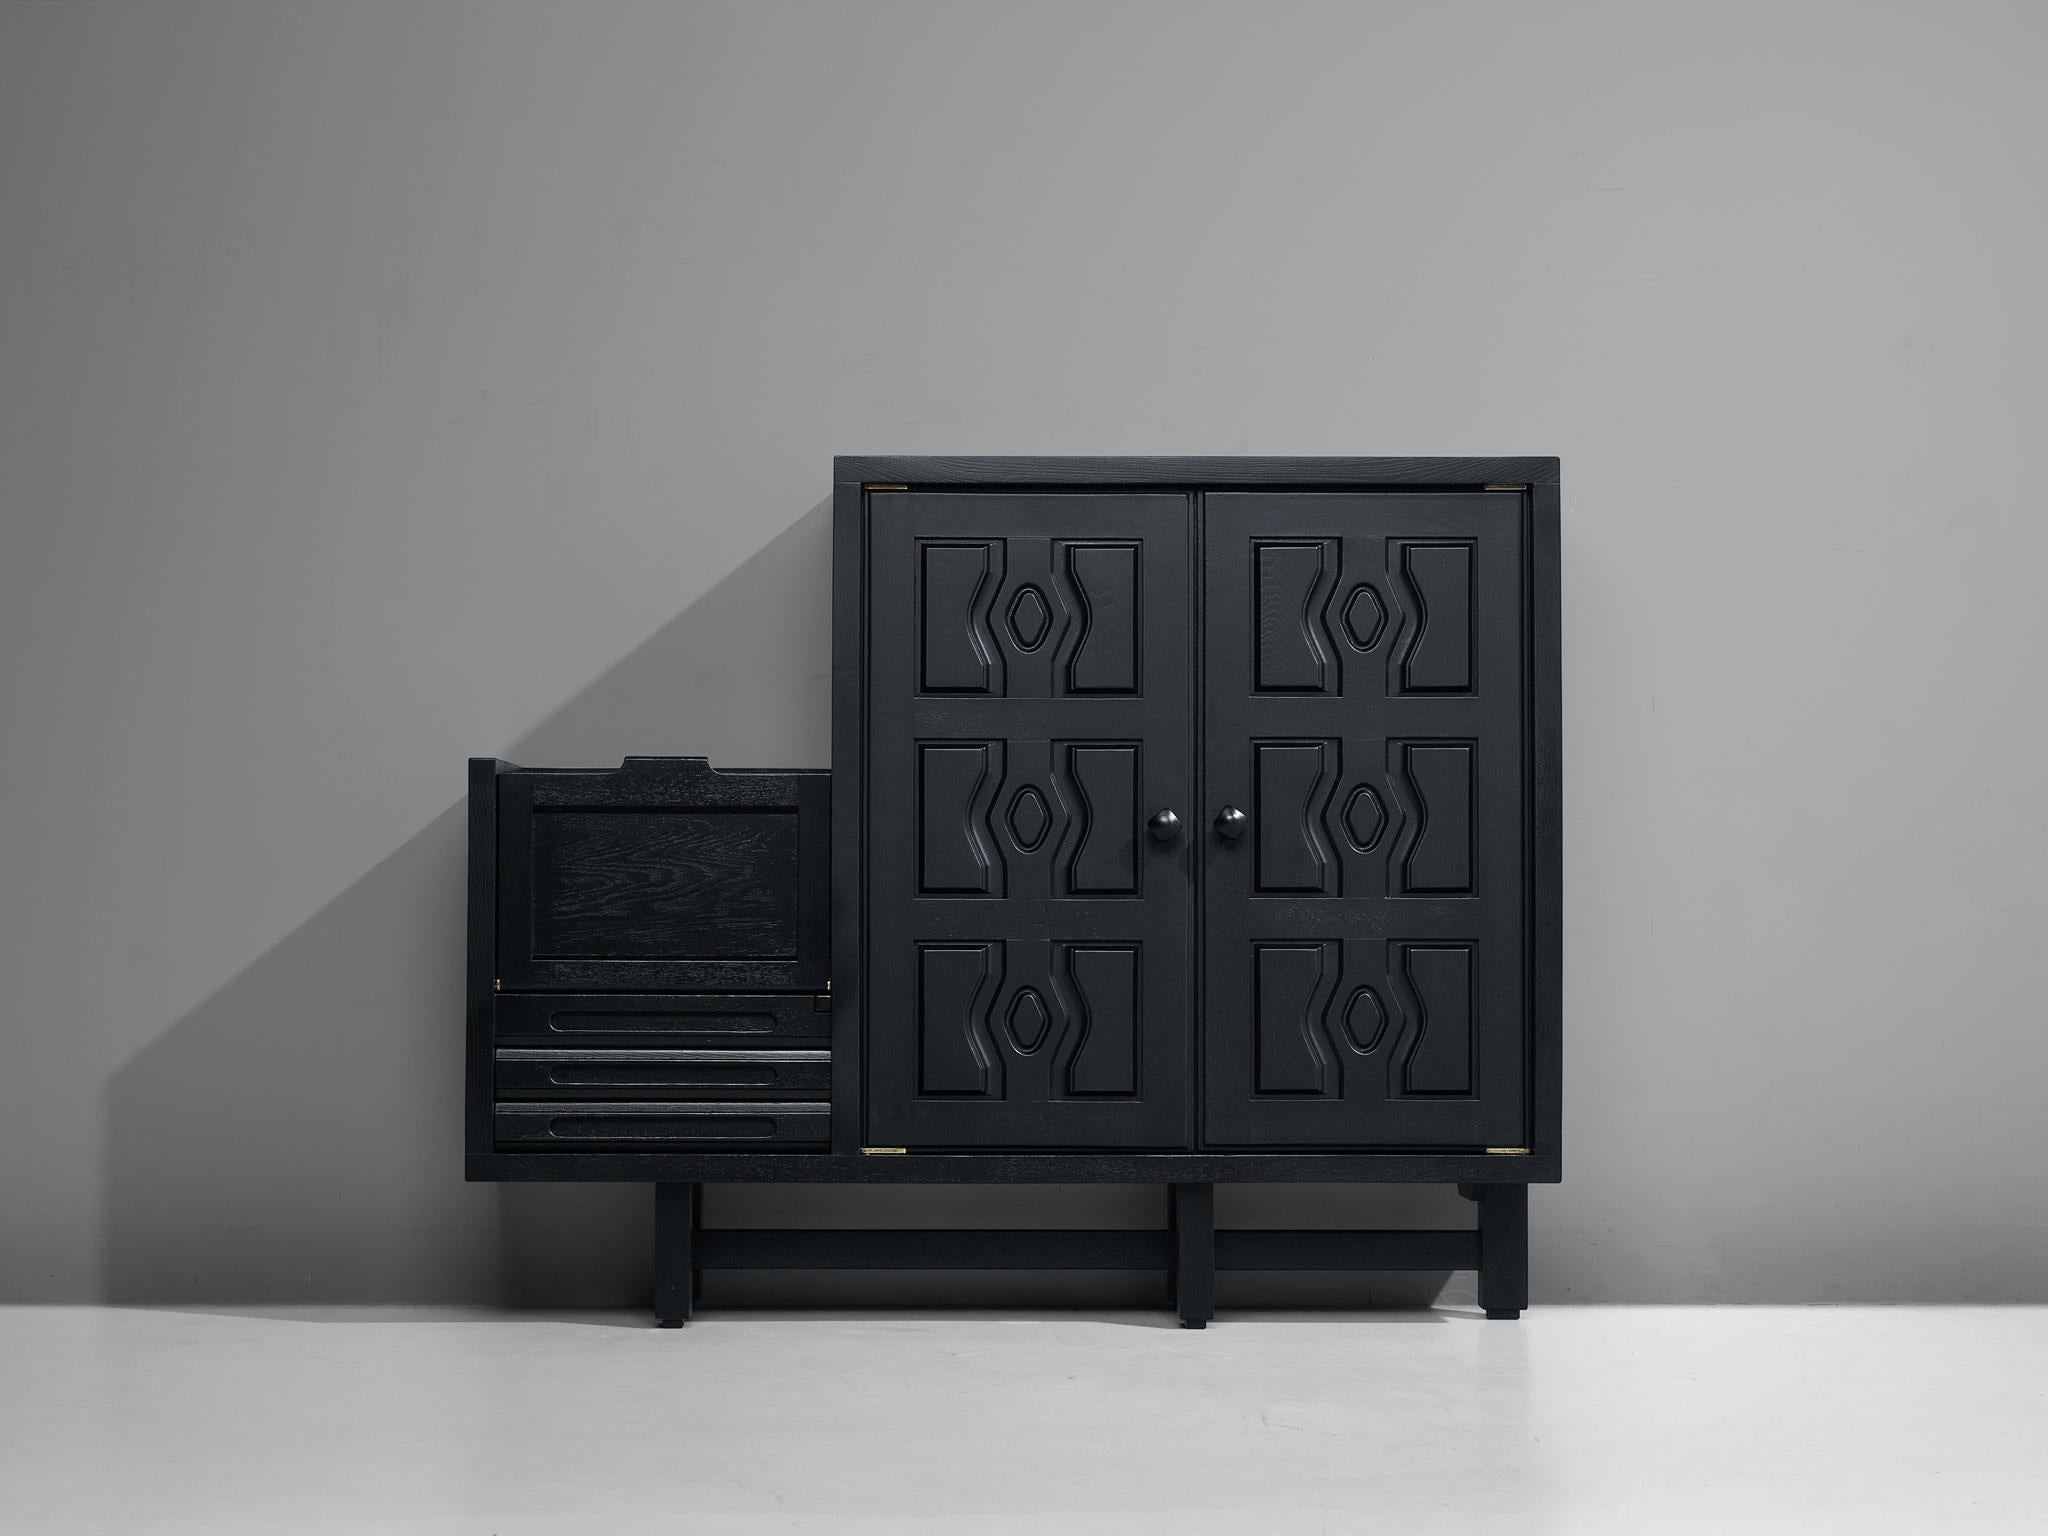 Guillerme & Chambron, cabinet, model 'Thierry', oak, France, 1960s.

This mischievous sideboard mirrors the European Gothic Revival period of the nineteenth century by means of the heavy black stained wood. The design seamlessly blends with any